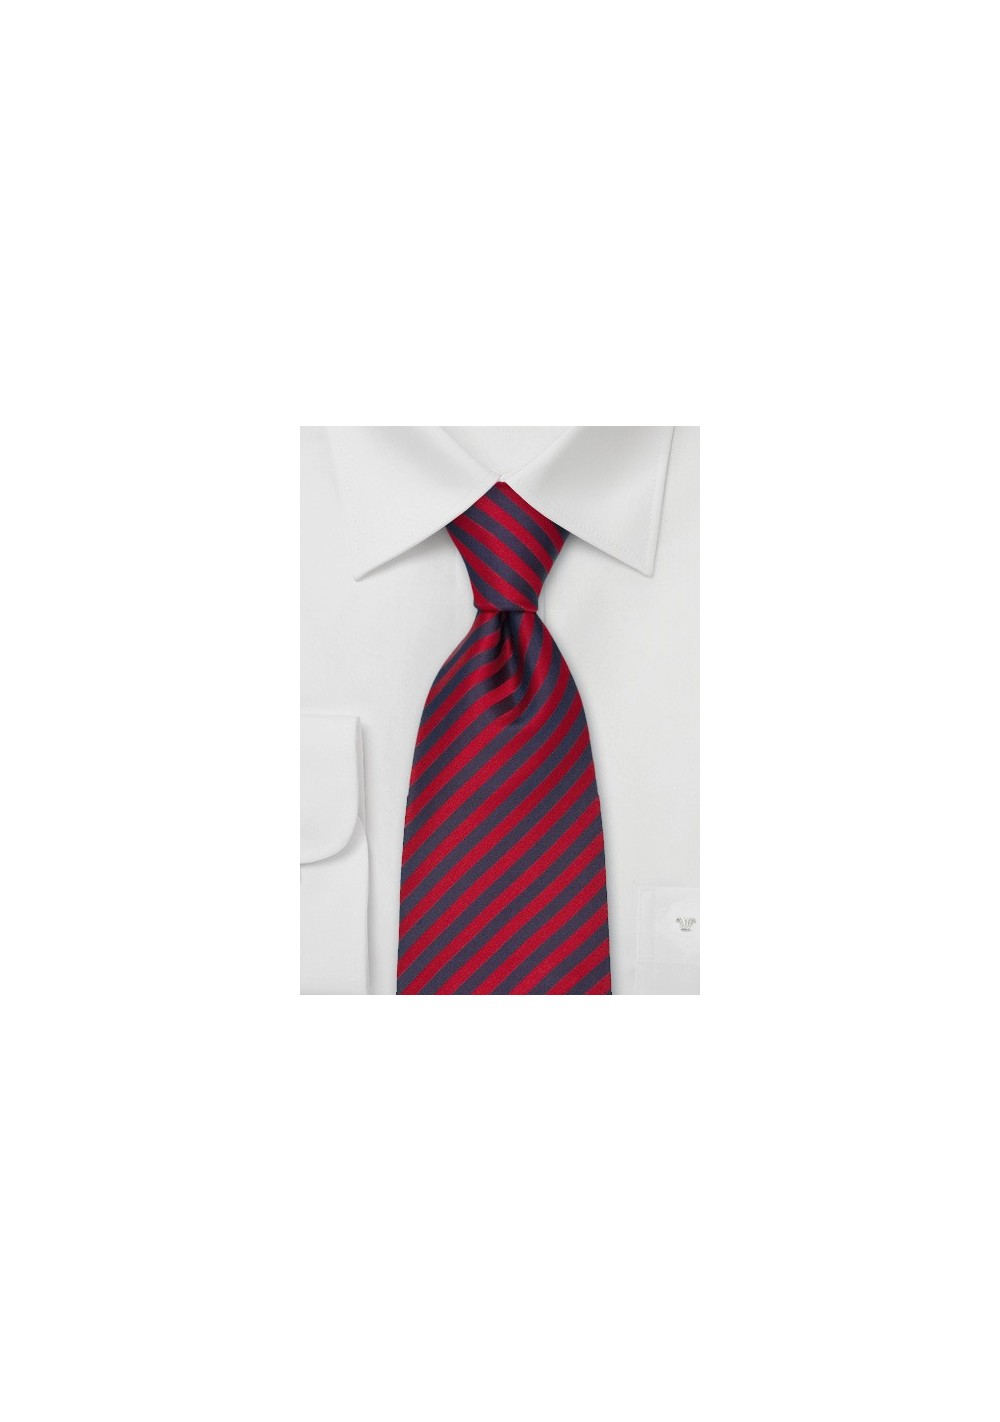 Classic Striped Ties - Striped "Signals" Tie by Parsely